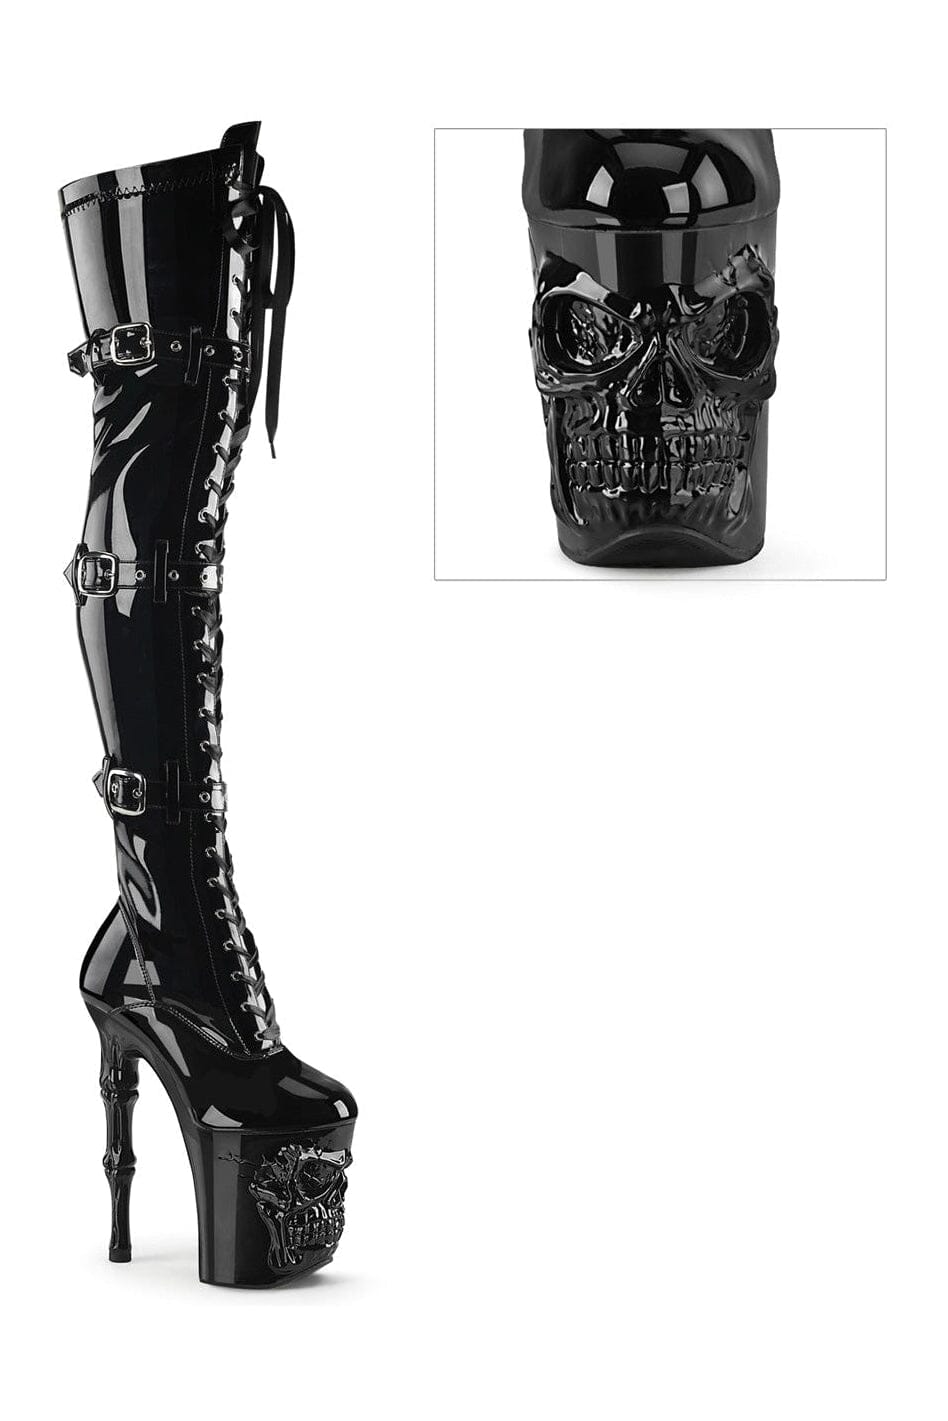 RAPTURE-3028 Black Patent Thigh Boot-Thigh Boots-Pleaser-Black-10-Patent-SEXYSHOES.COM